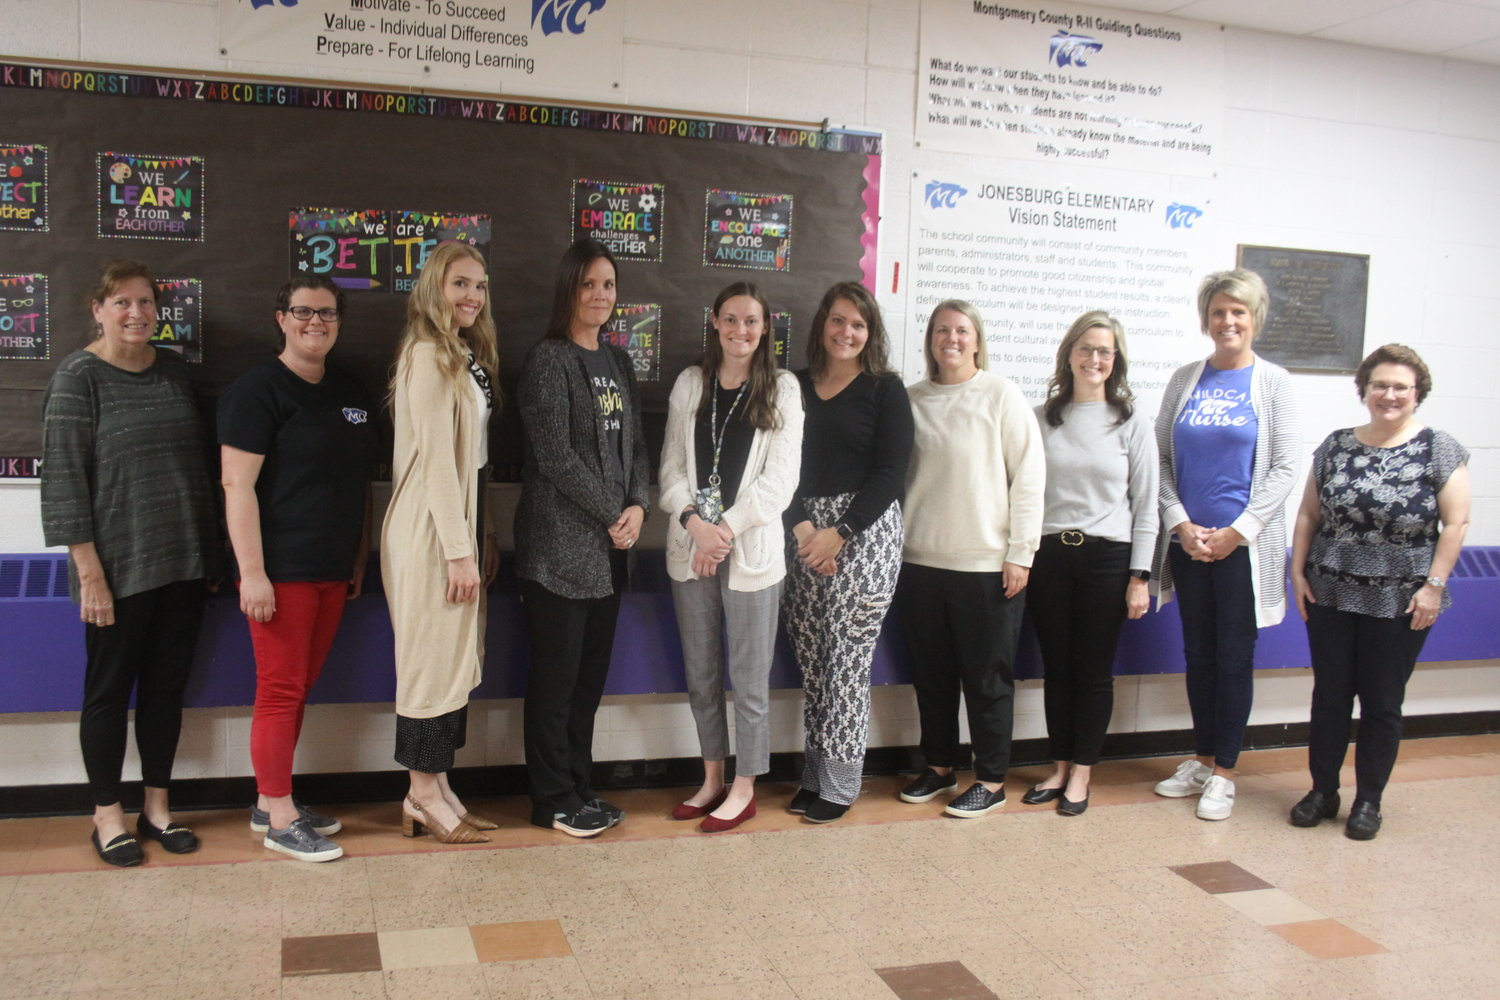 The Montgomery County R-II School District awarded mini grants to 13 teachers this year. Pictured, from left, are Tina Harms, Jeanette Ventimigilia, Eva Rasey, Jessica Frederick, Sheridan Temperly, Alayna Parmalee, Audra Heimer, Laura Yelton, Carla Parker and Stacy Godsil.